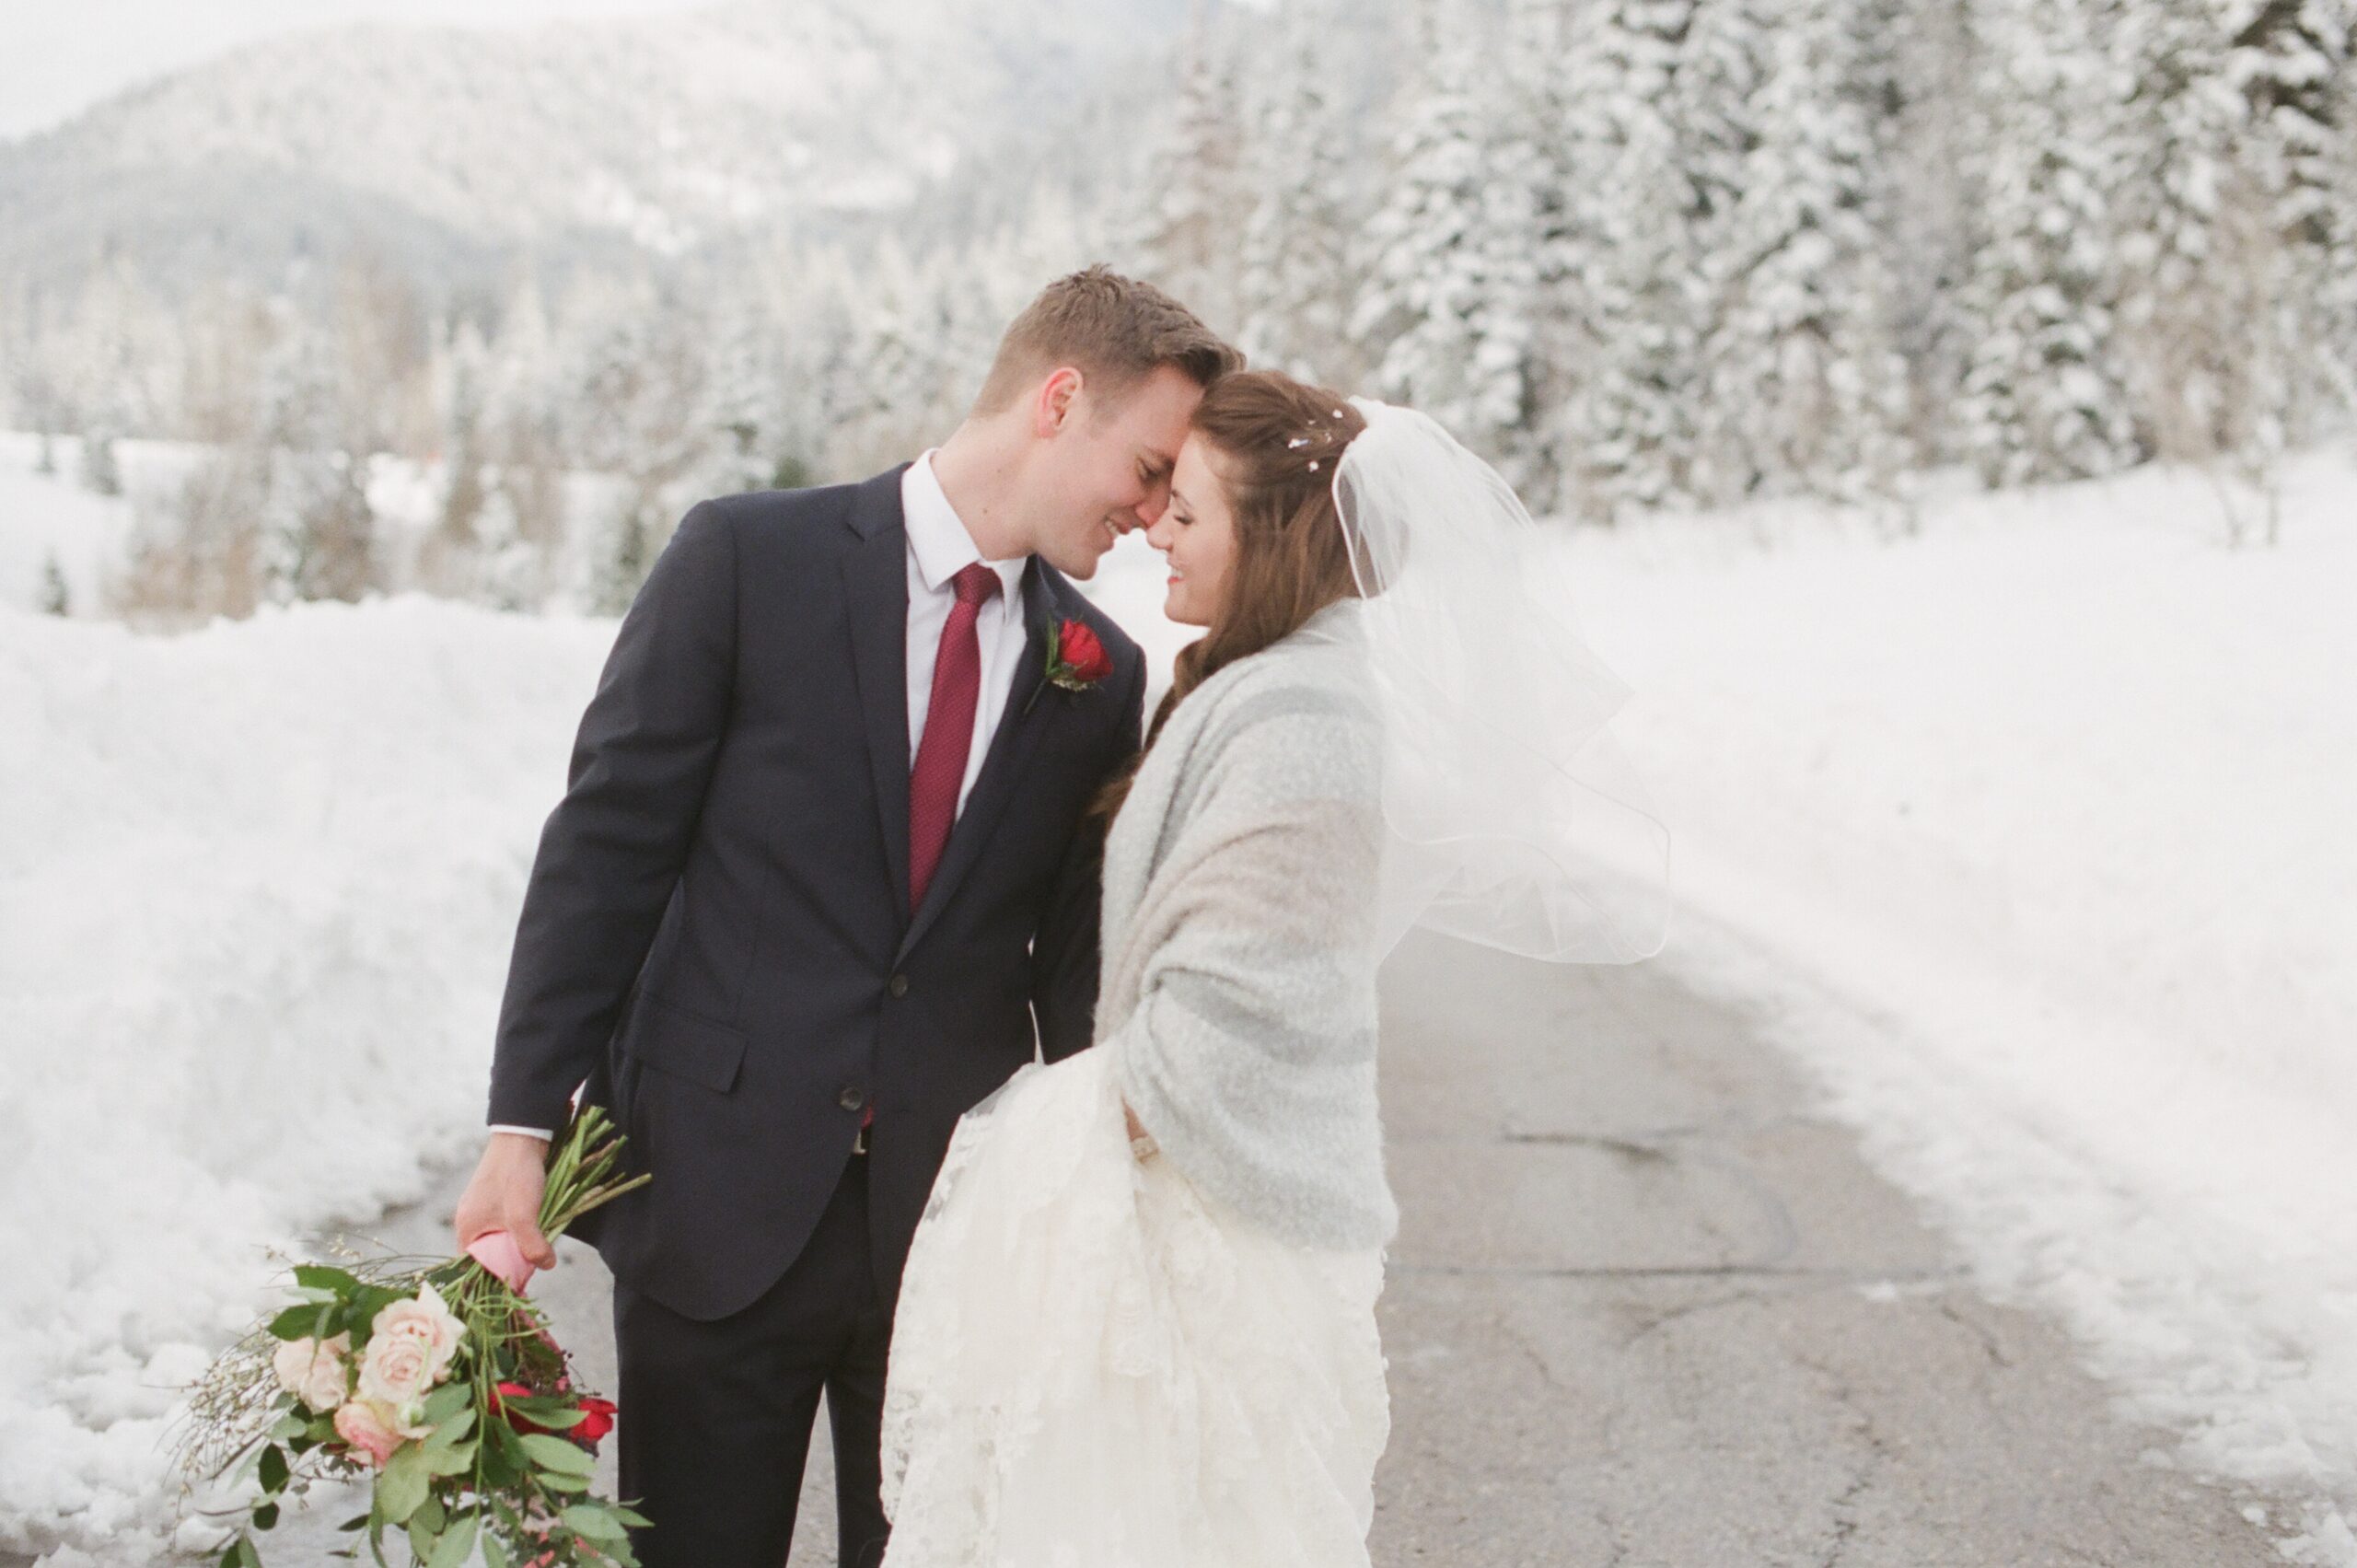 Utah winter photographer tips for bridals in the snow. Bride in shawl